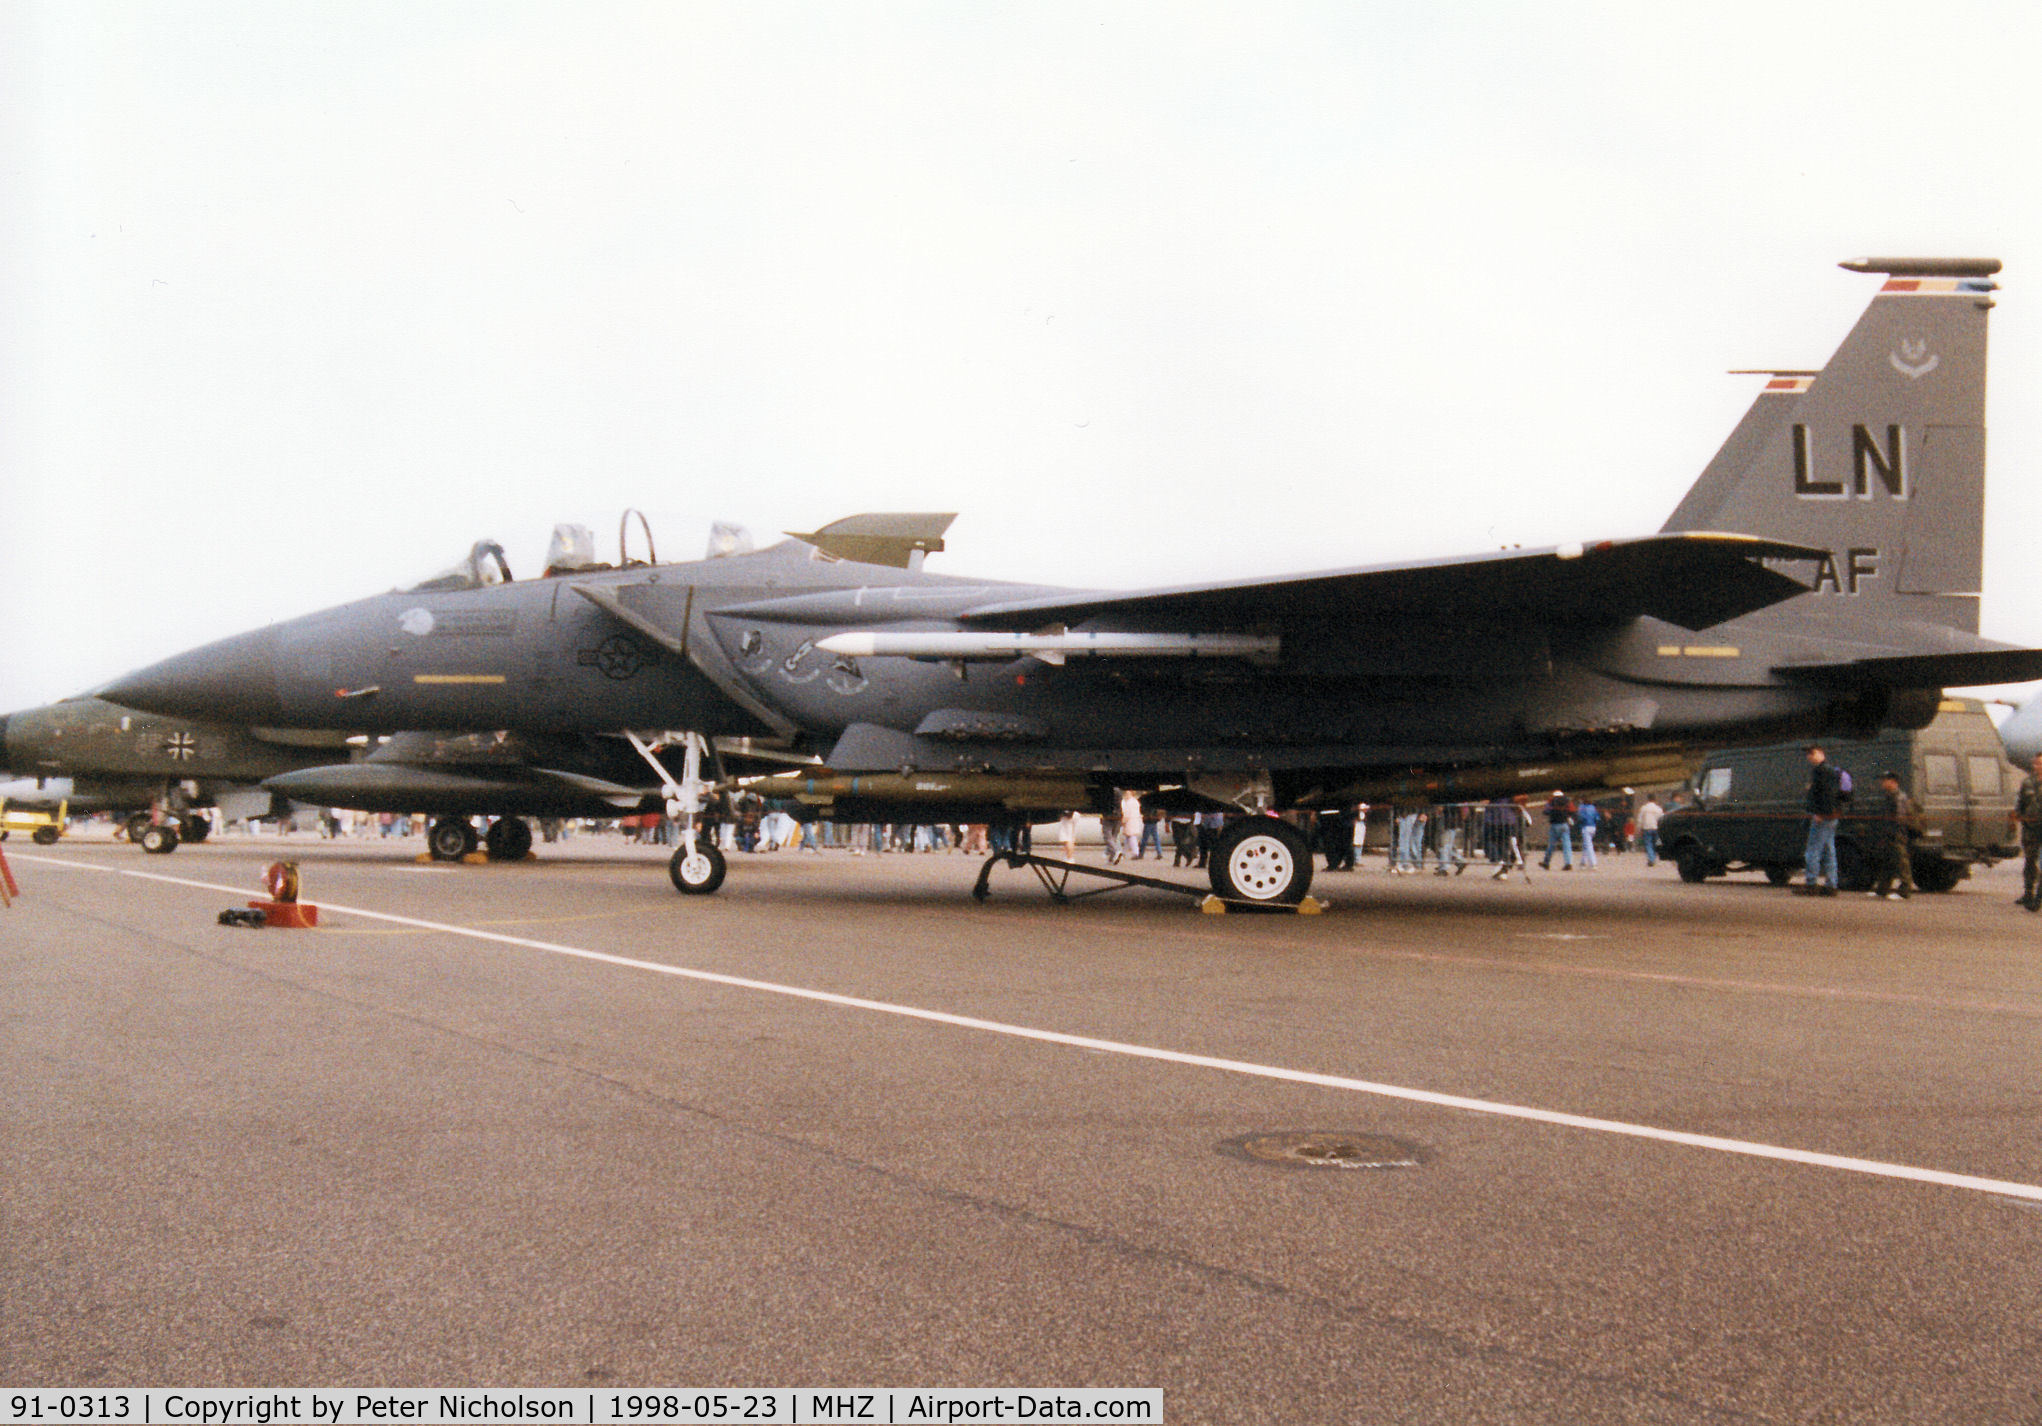 91-0313, 1991 McDonnell Douglas F-15E Strike Eagle C/N 1220/E178, F-15E Strike Eagle of the 48th Fighter Wing at RAF Lakenheath in special markings for the 3rd Air Force Commanding Officer.